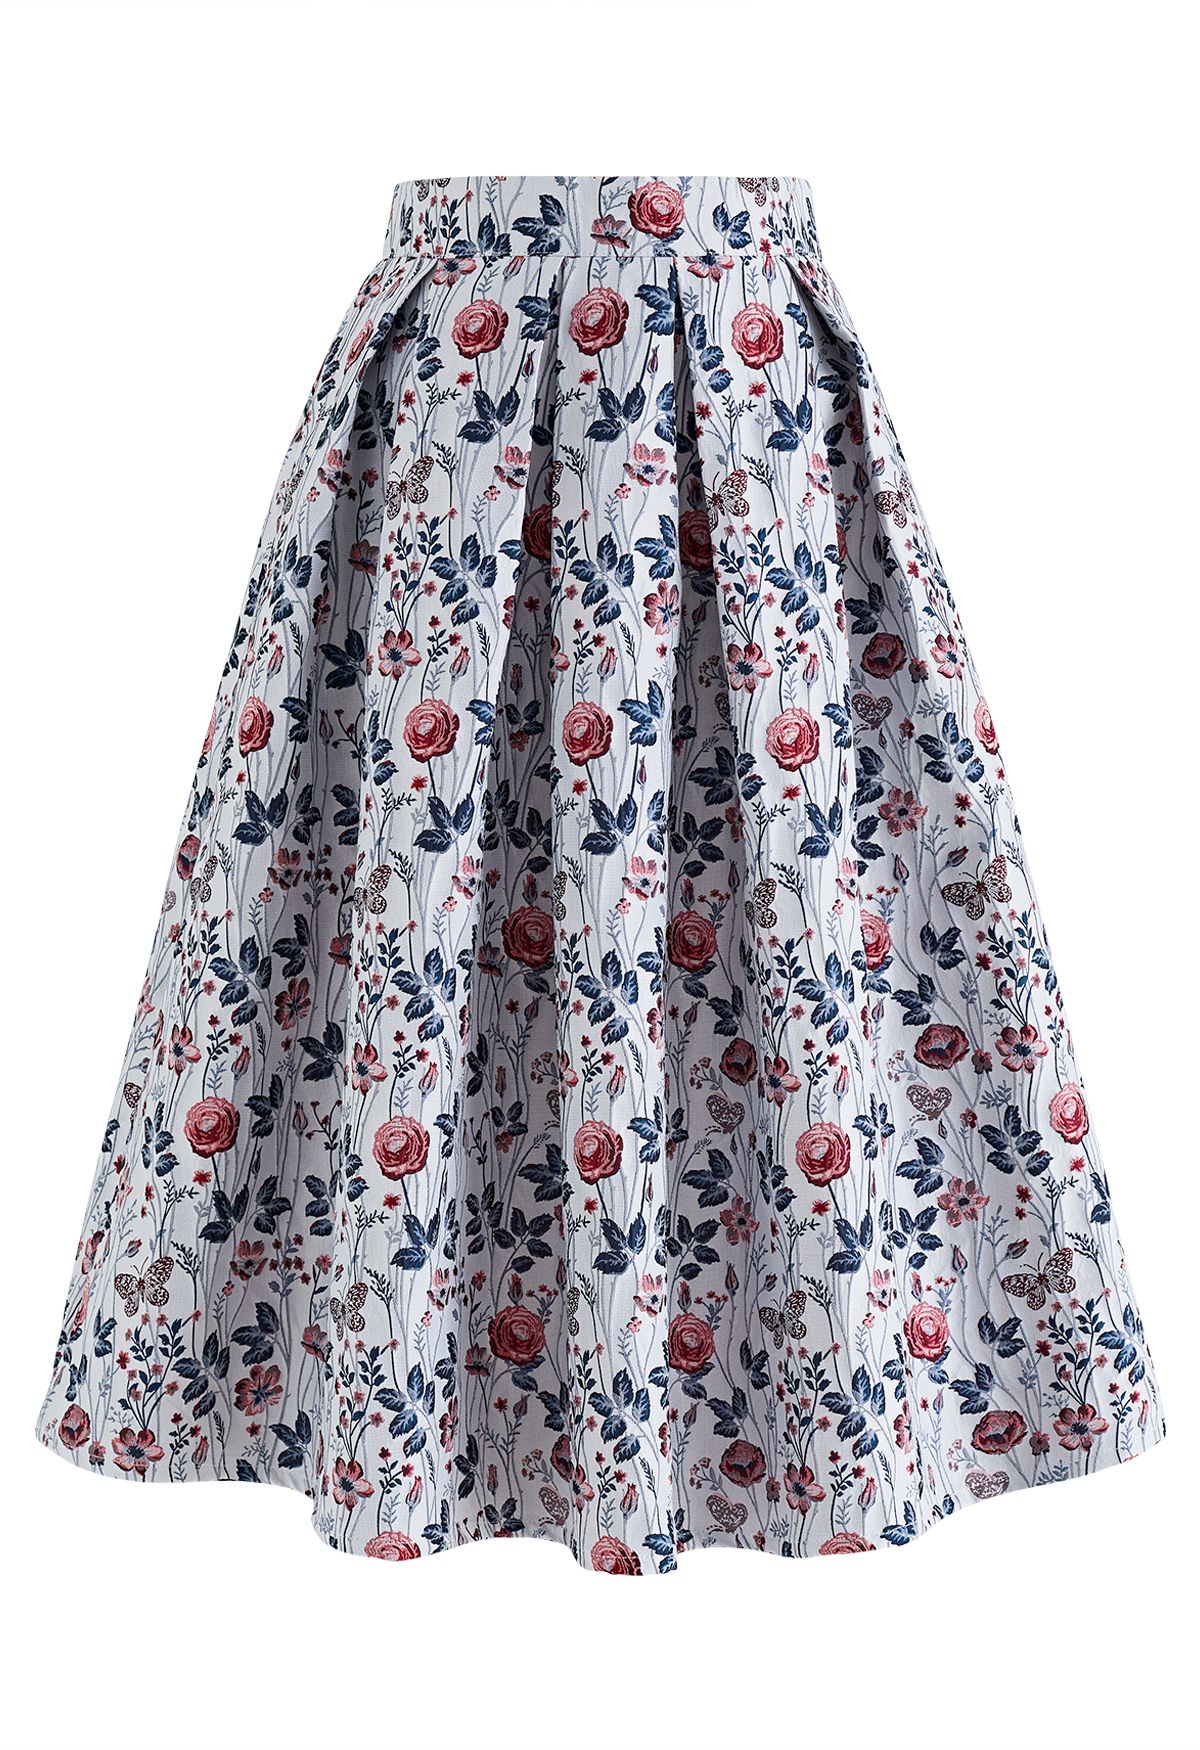 Lost in Rose Bush Jacquard Pleated Midi Skirt in Ivory - Retro, Indie ...